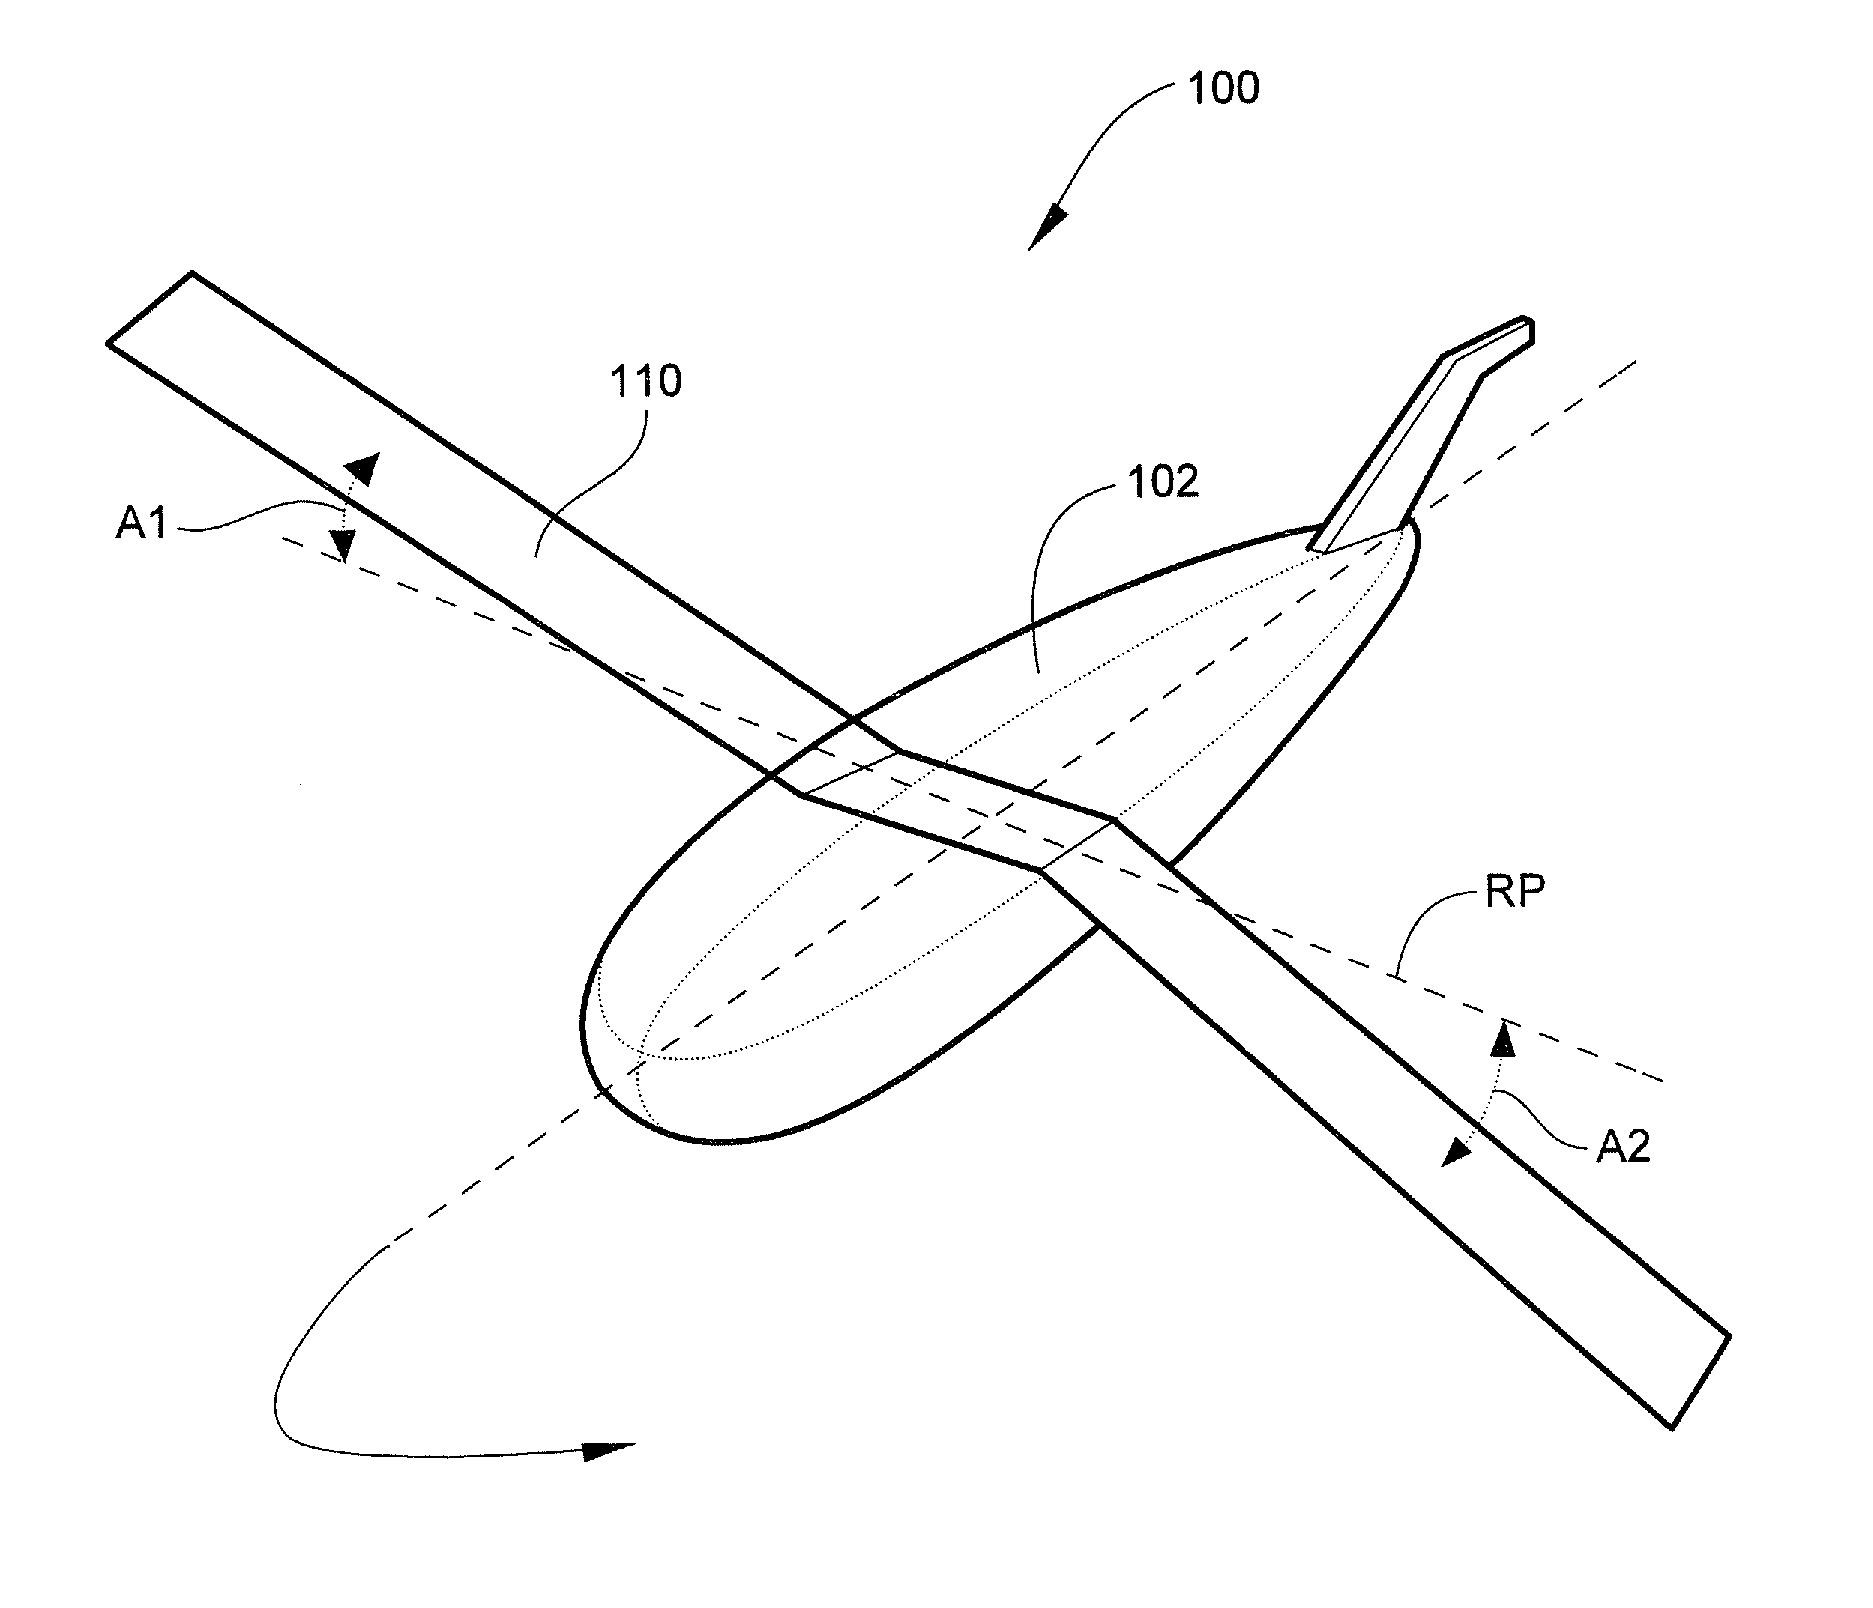 Submersible vehicles and methods for transiting the same in a body of liquid